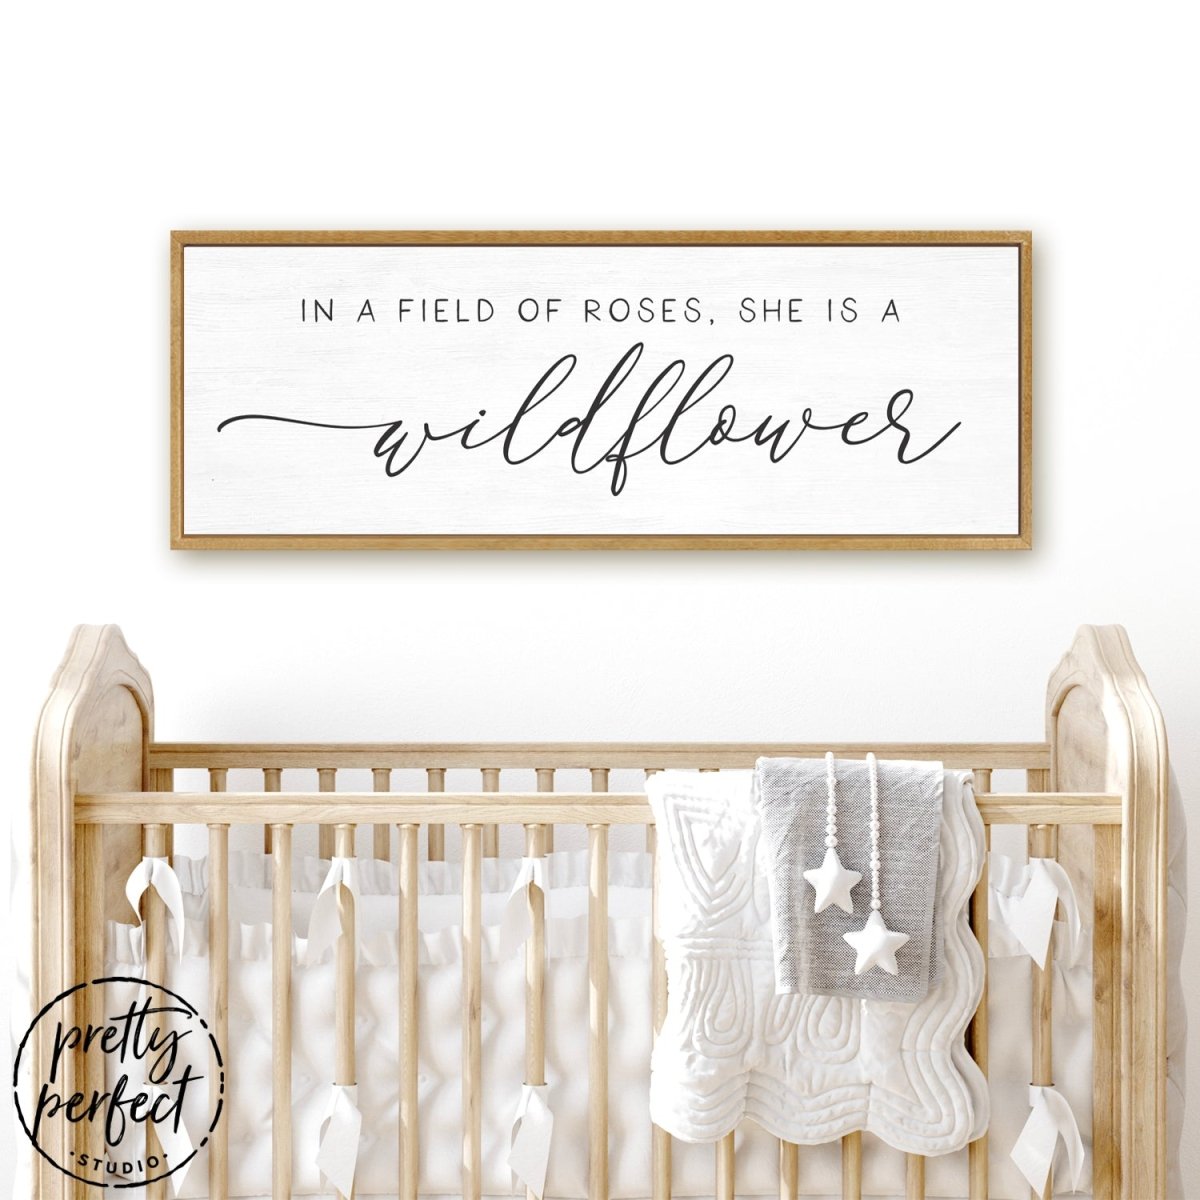 In A Field Of Roses She Is a Wildflower Sign Hanging Above Baby Crib - Pretty Perfect Studio